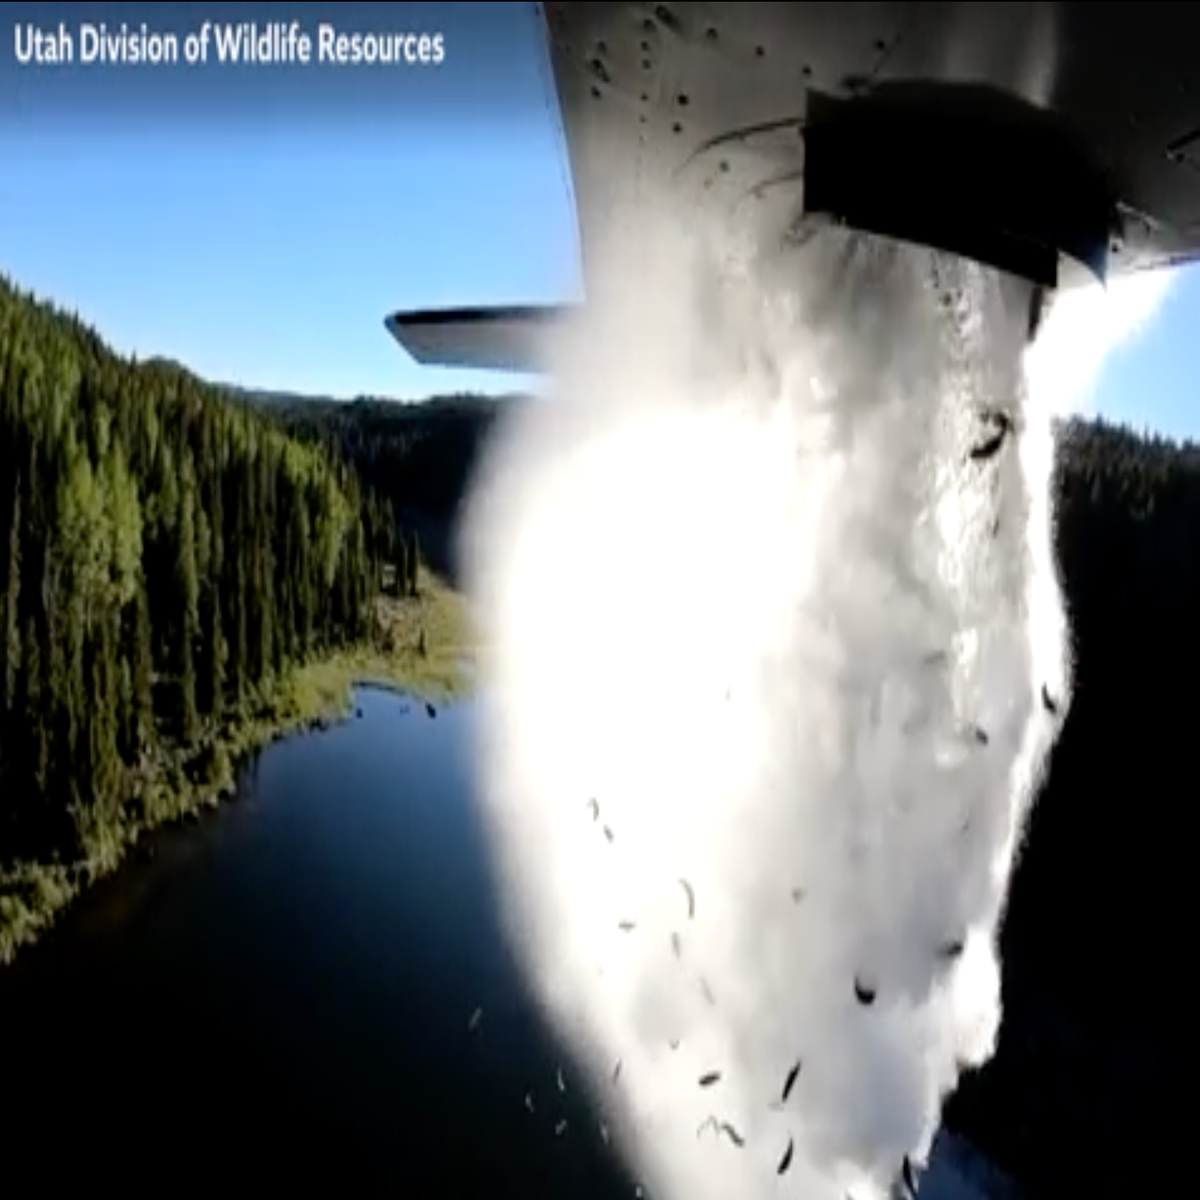 Mesmerizing video shows hundreds of fish being released from back of plane  into lake